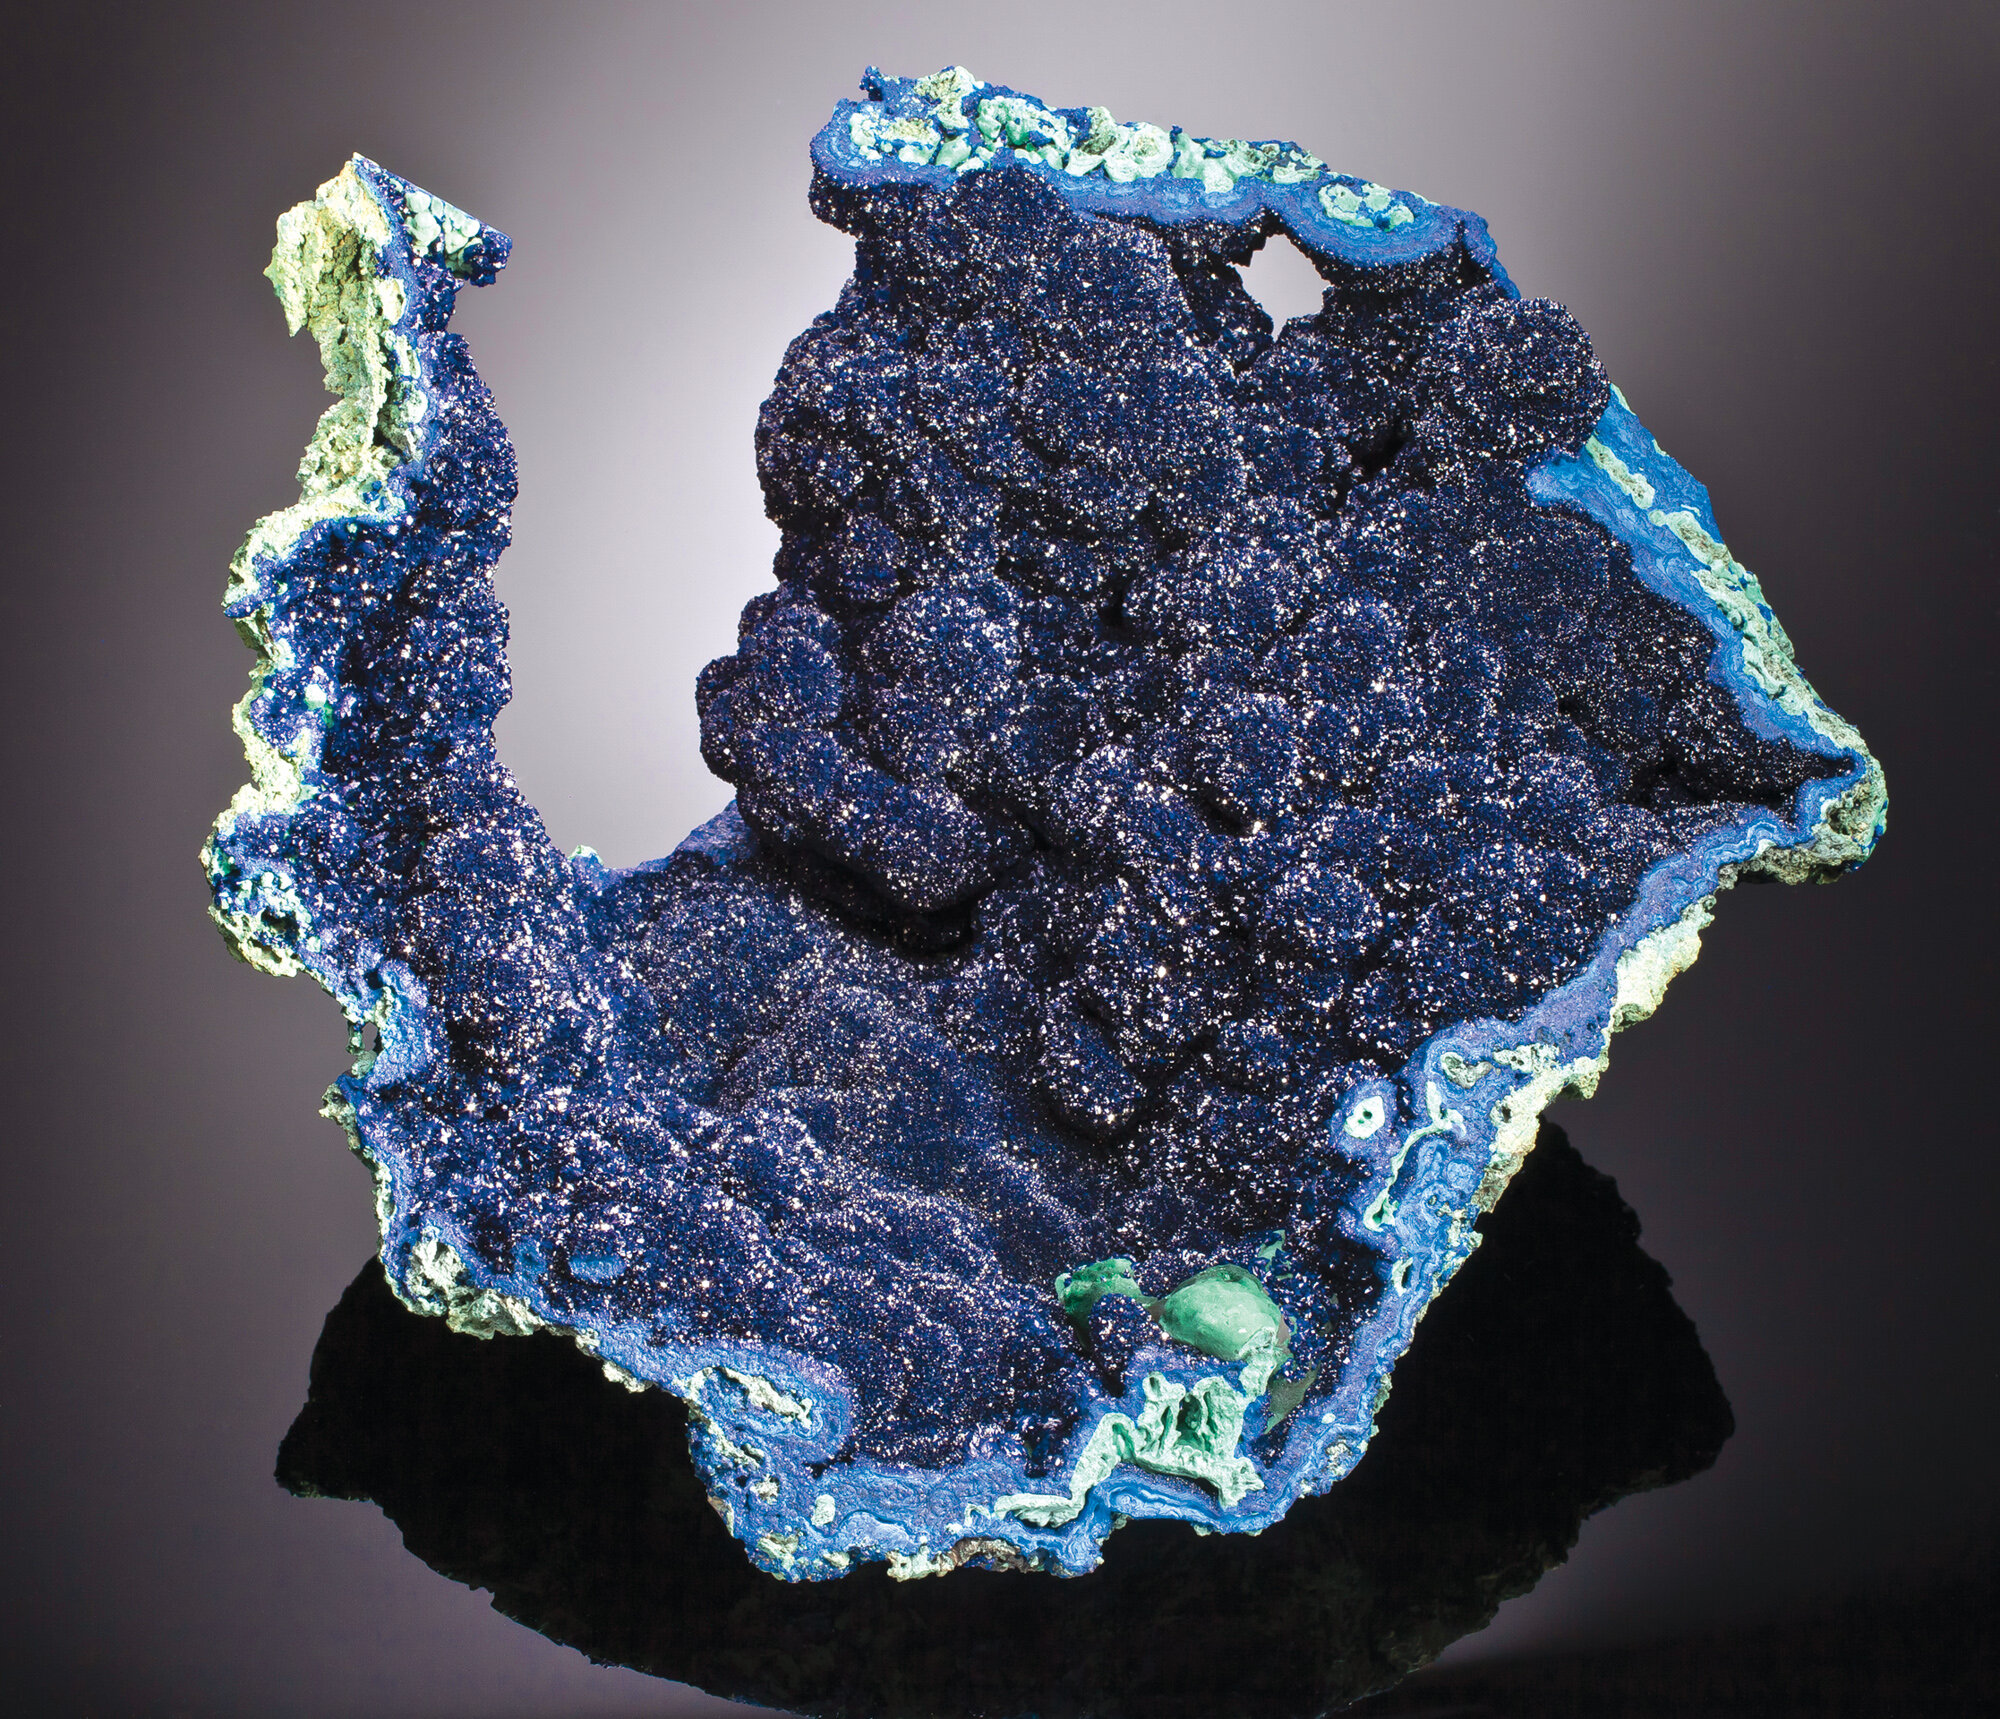  Azurite, 29 cm, from Liufengshan mine, Guichi district, Chizhou Prefecture, Anhui Province, China. Found ca. 2002. Ex Bruce Oreck collection. 